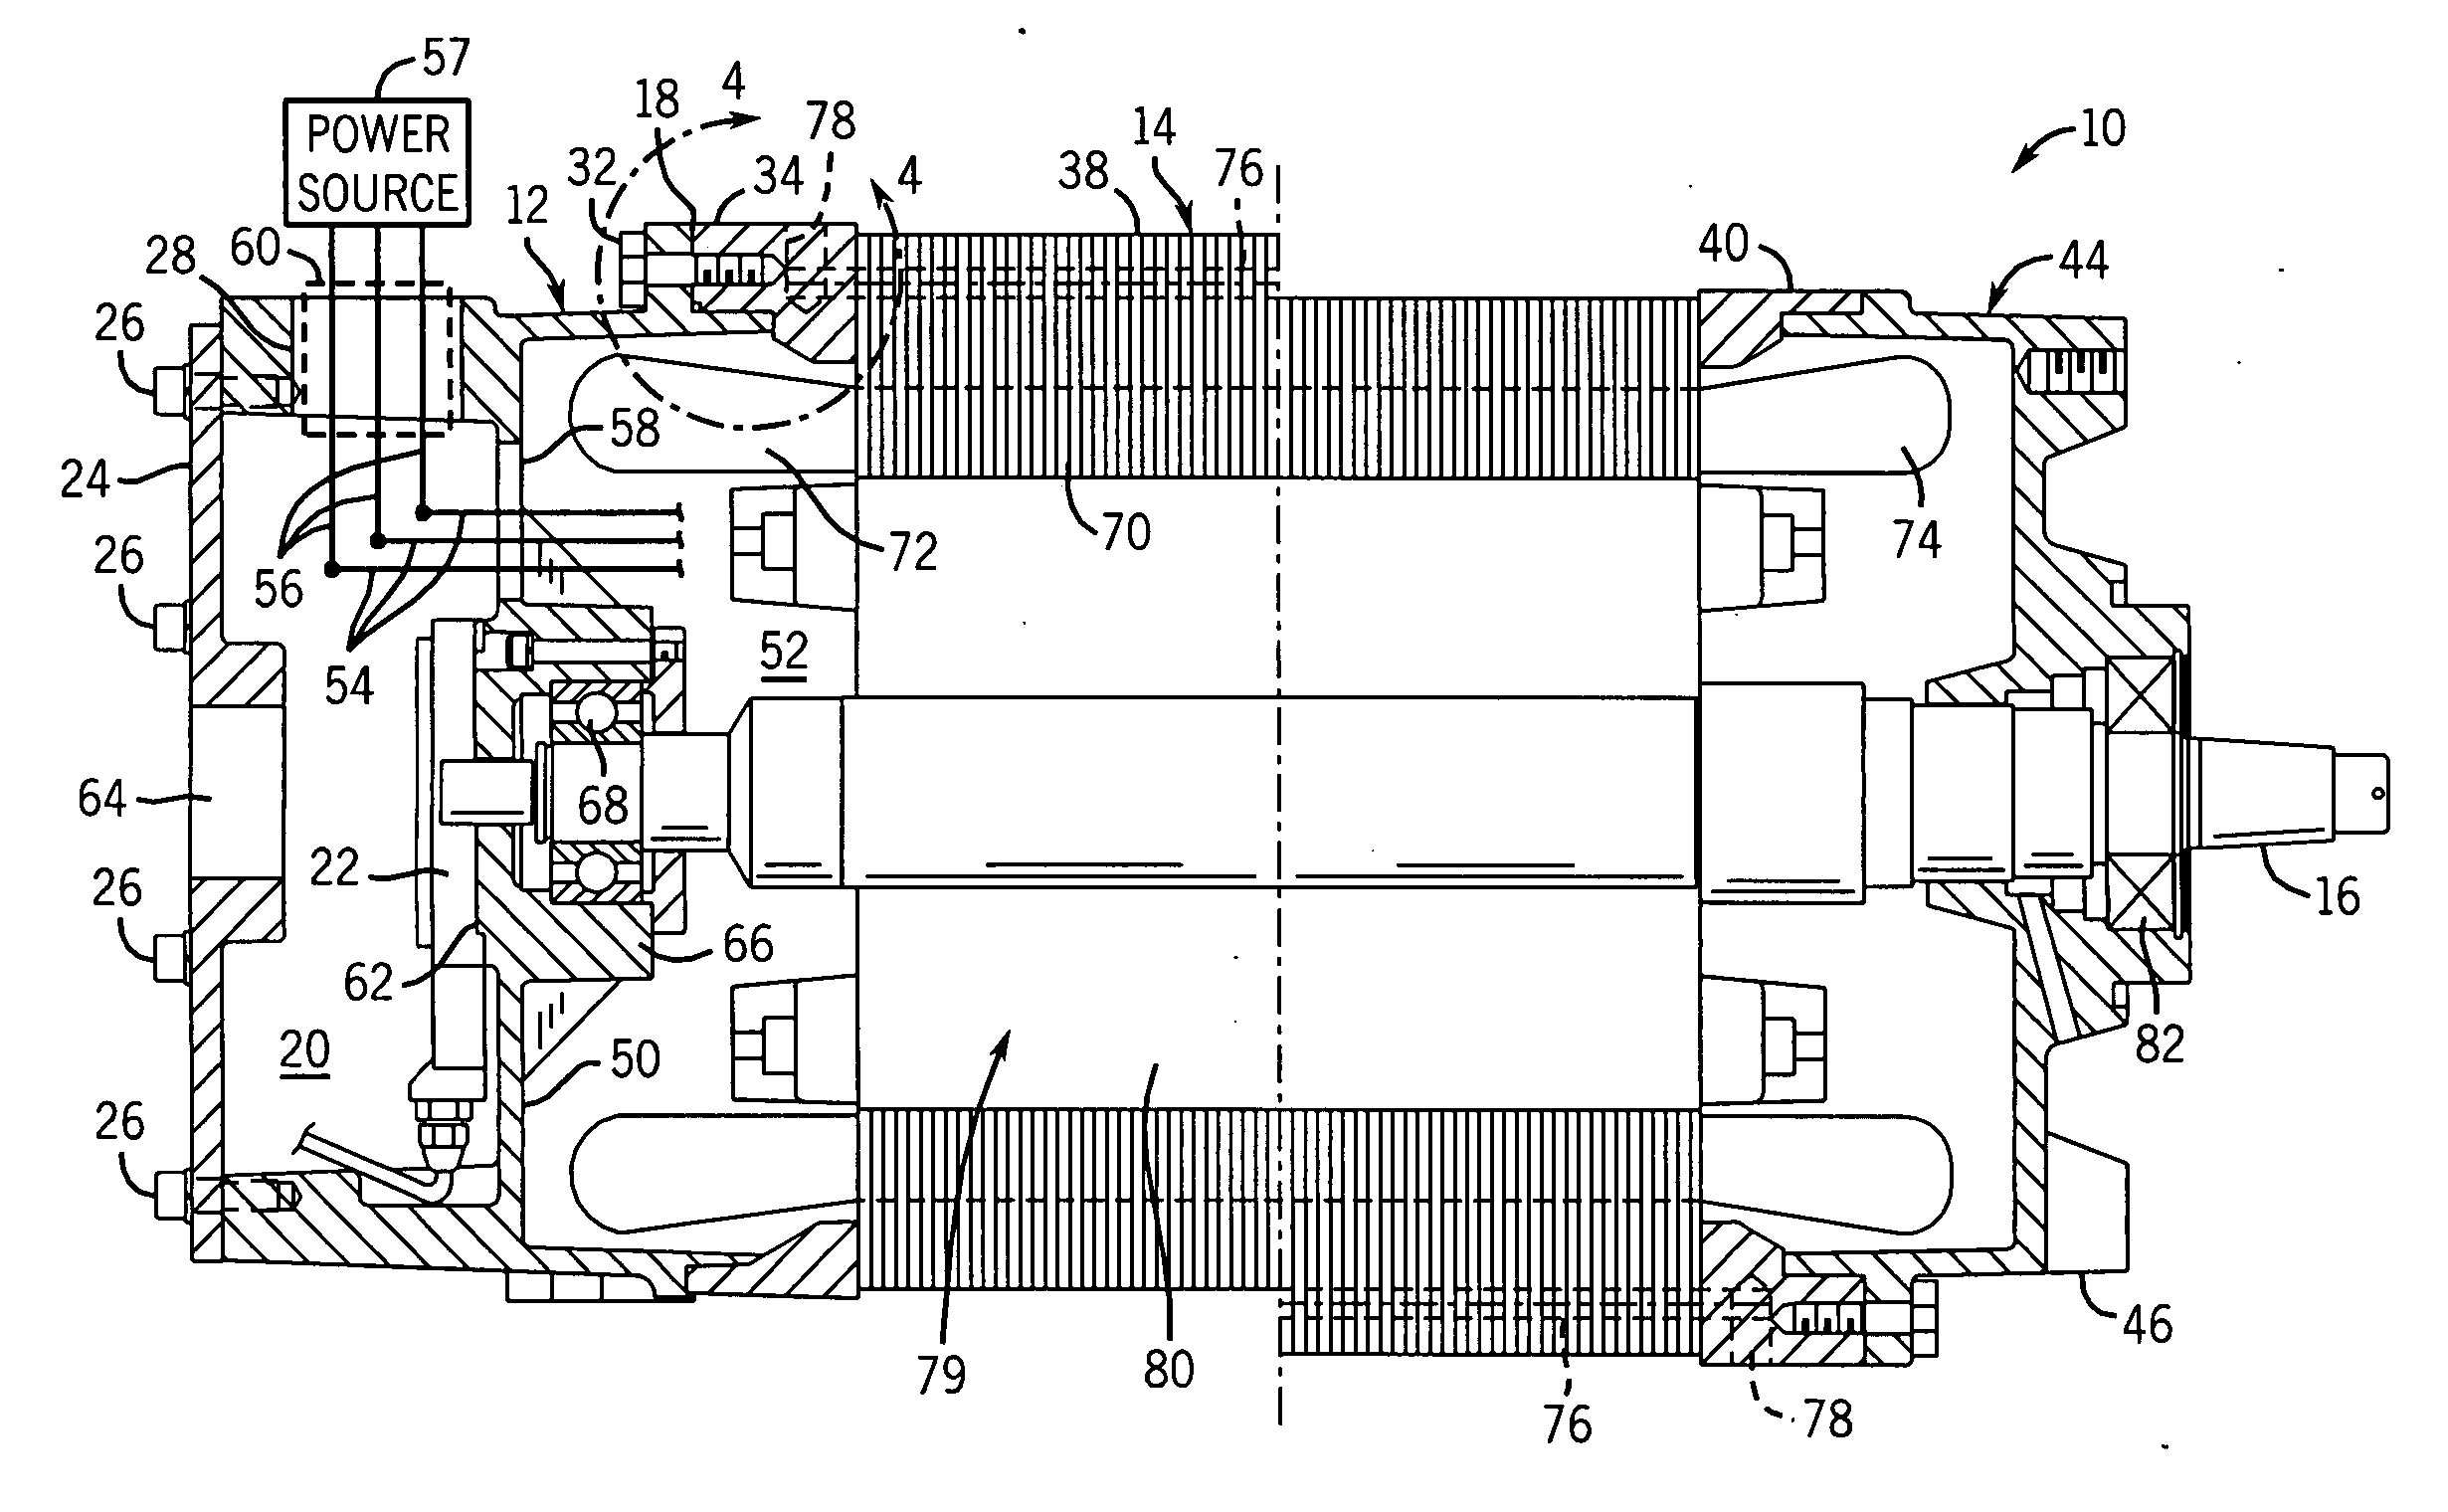 Explosion-proof motor with integrated sensor/lead housing